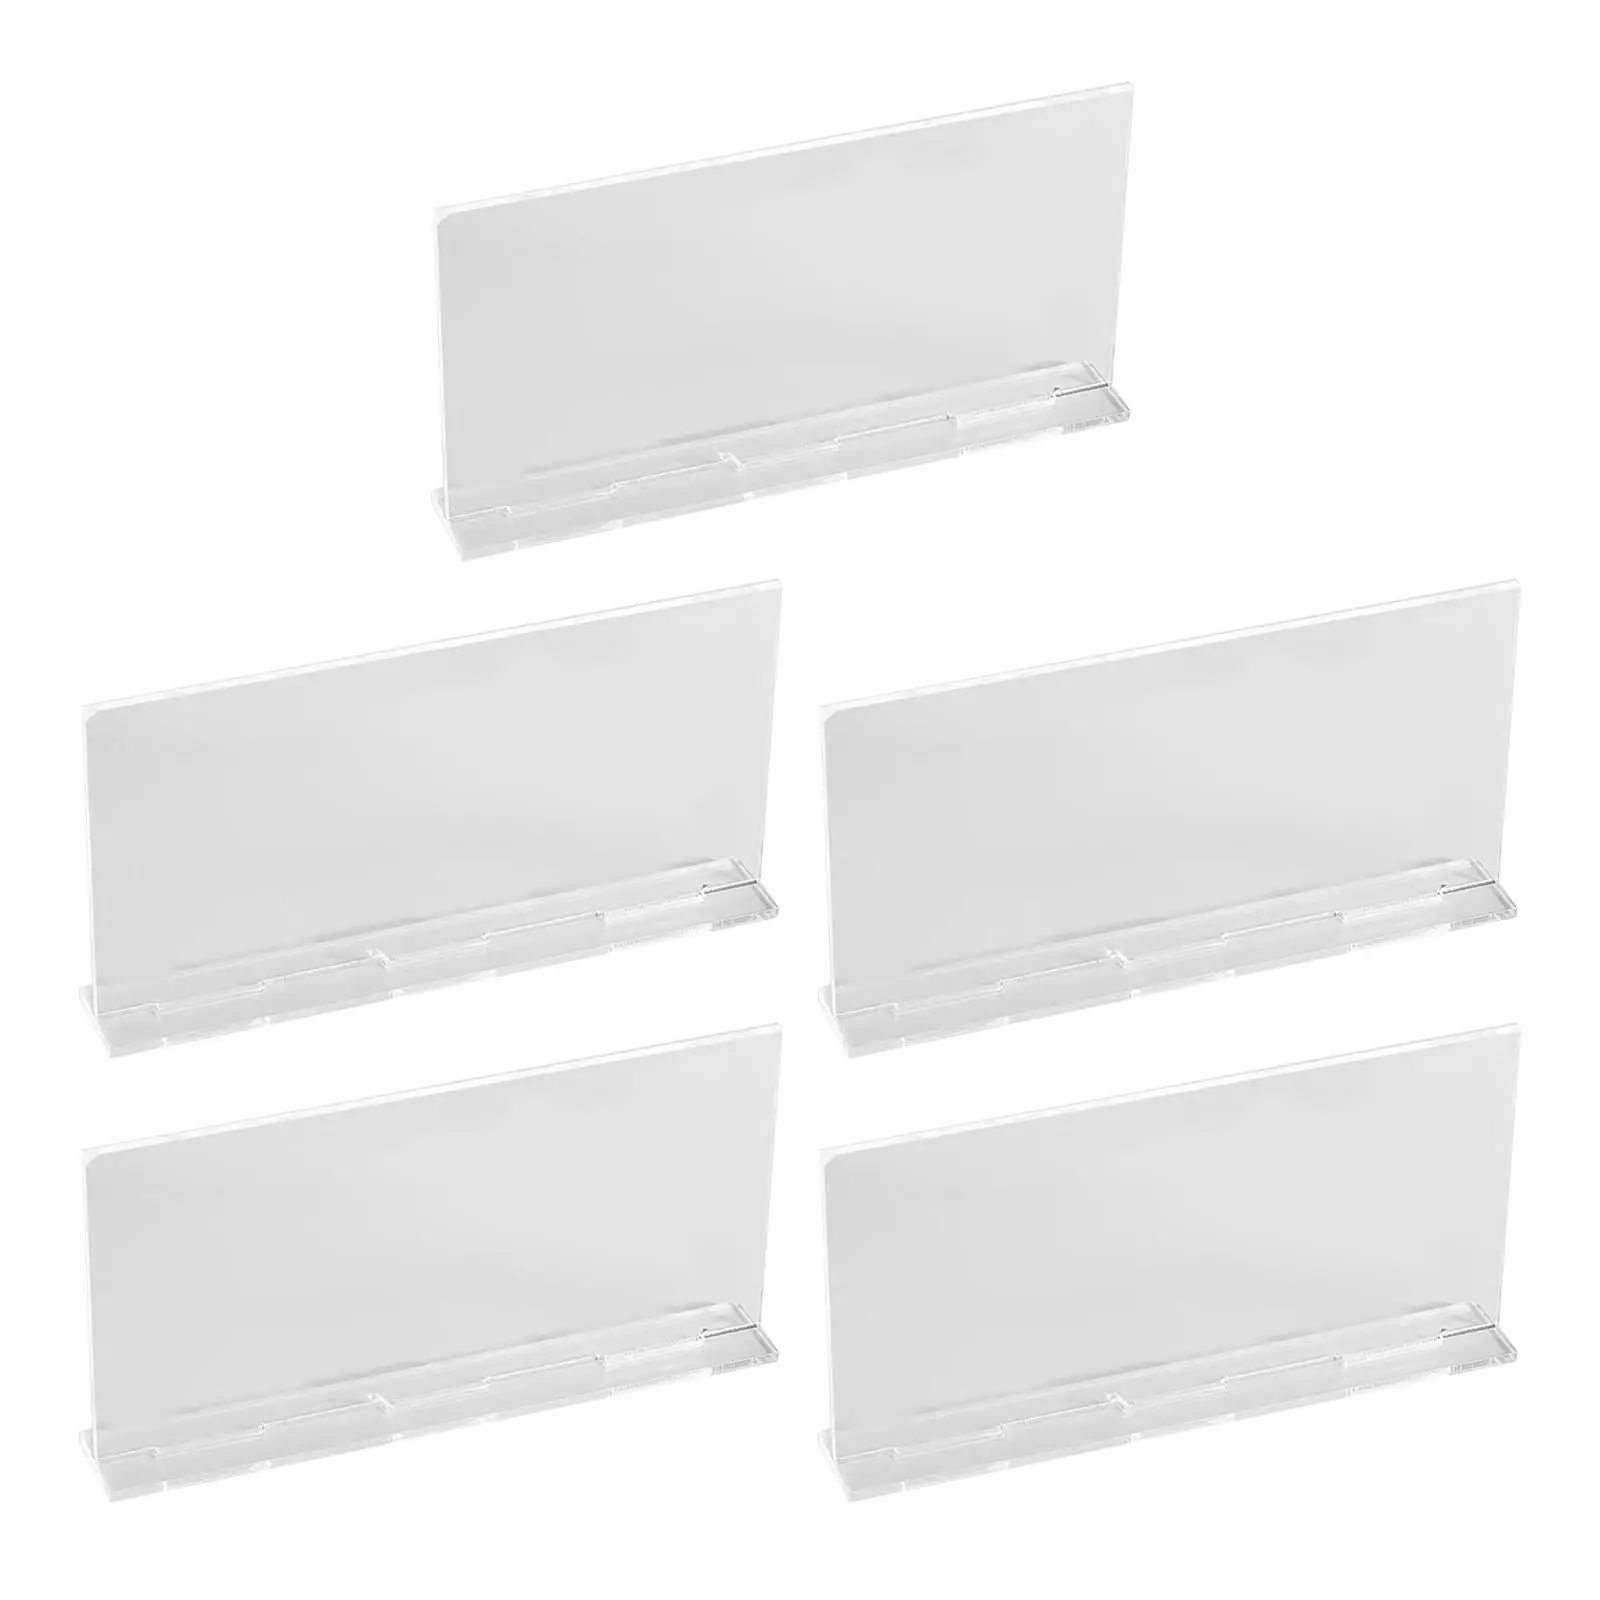 5x Clear Acrylic Place Cards Name Signs Cards Stand Rectangle Seating Name Cards Cards DIY for Wedding dinner Birthday Party